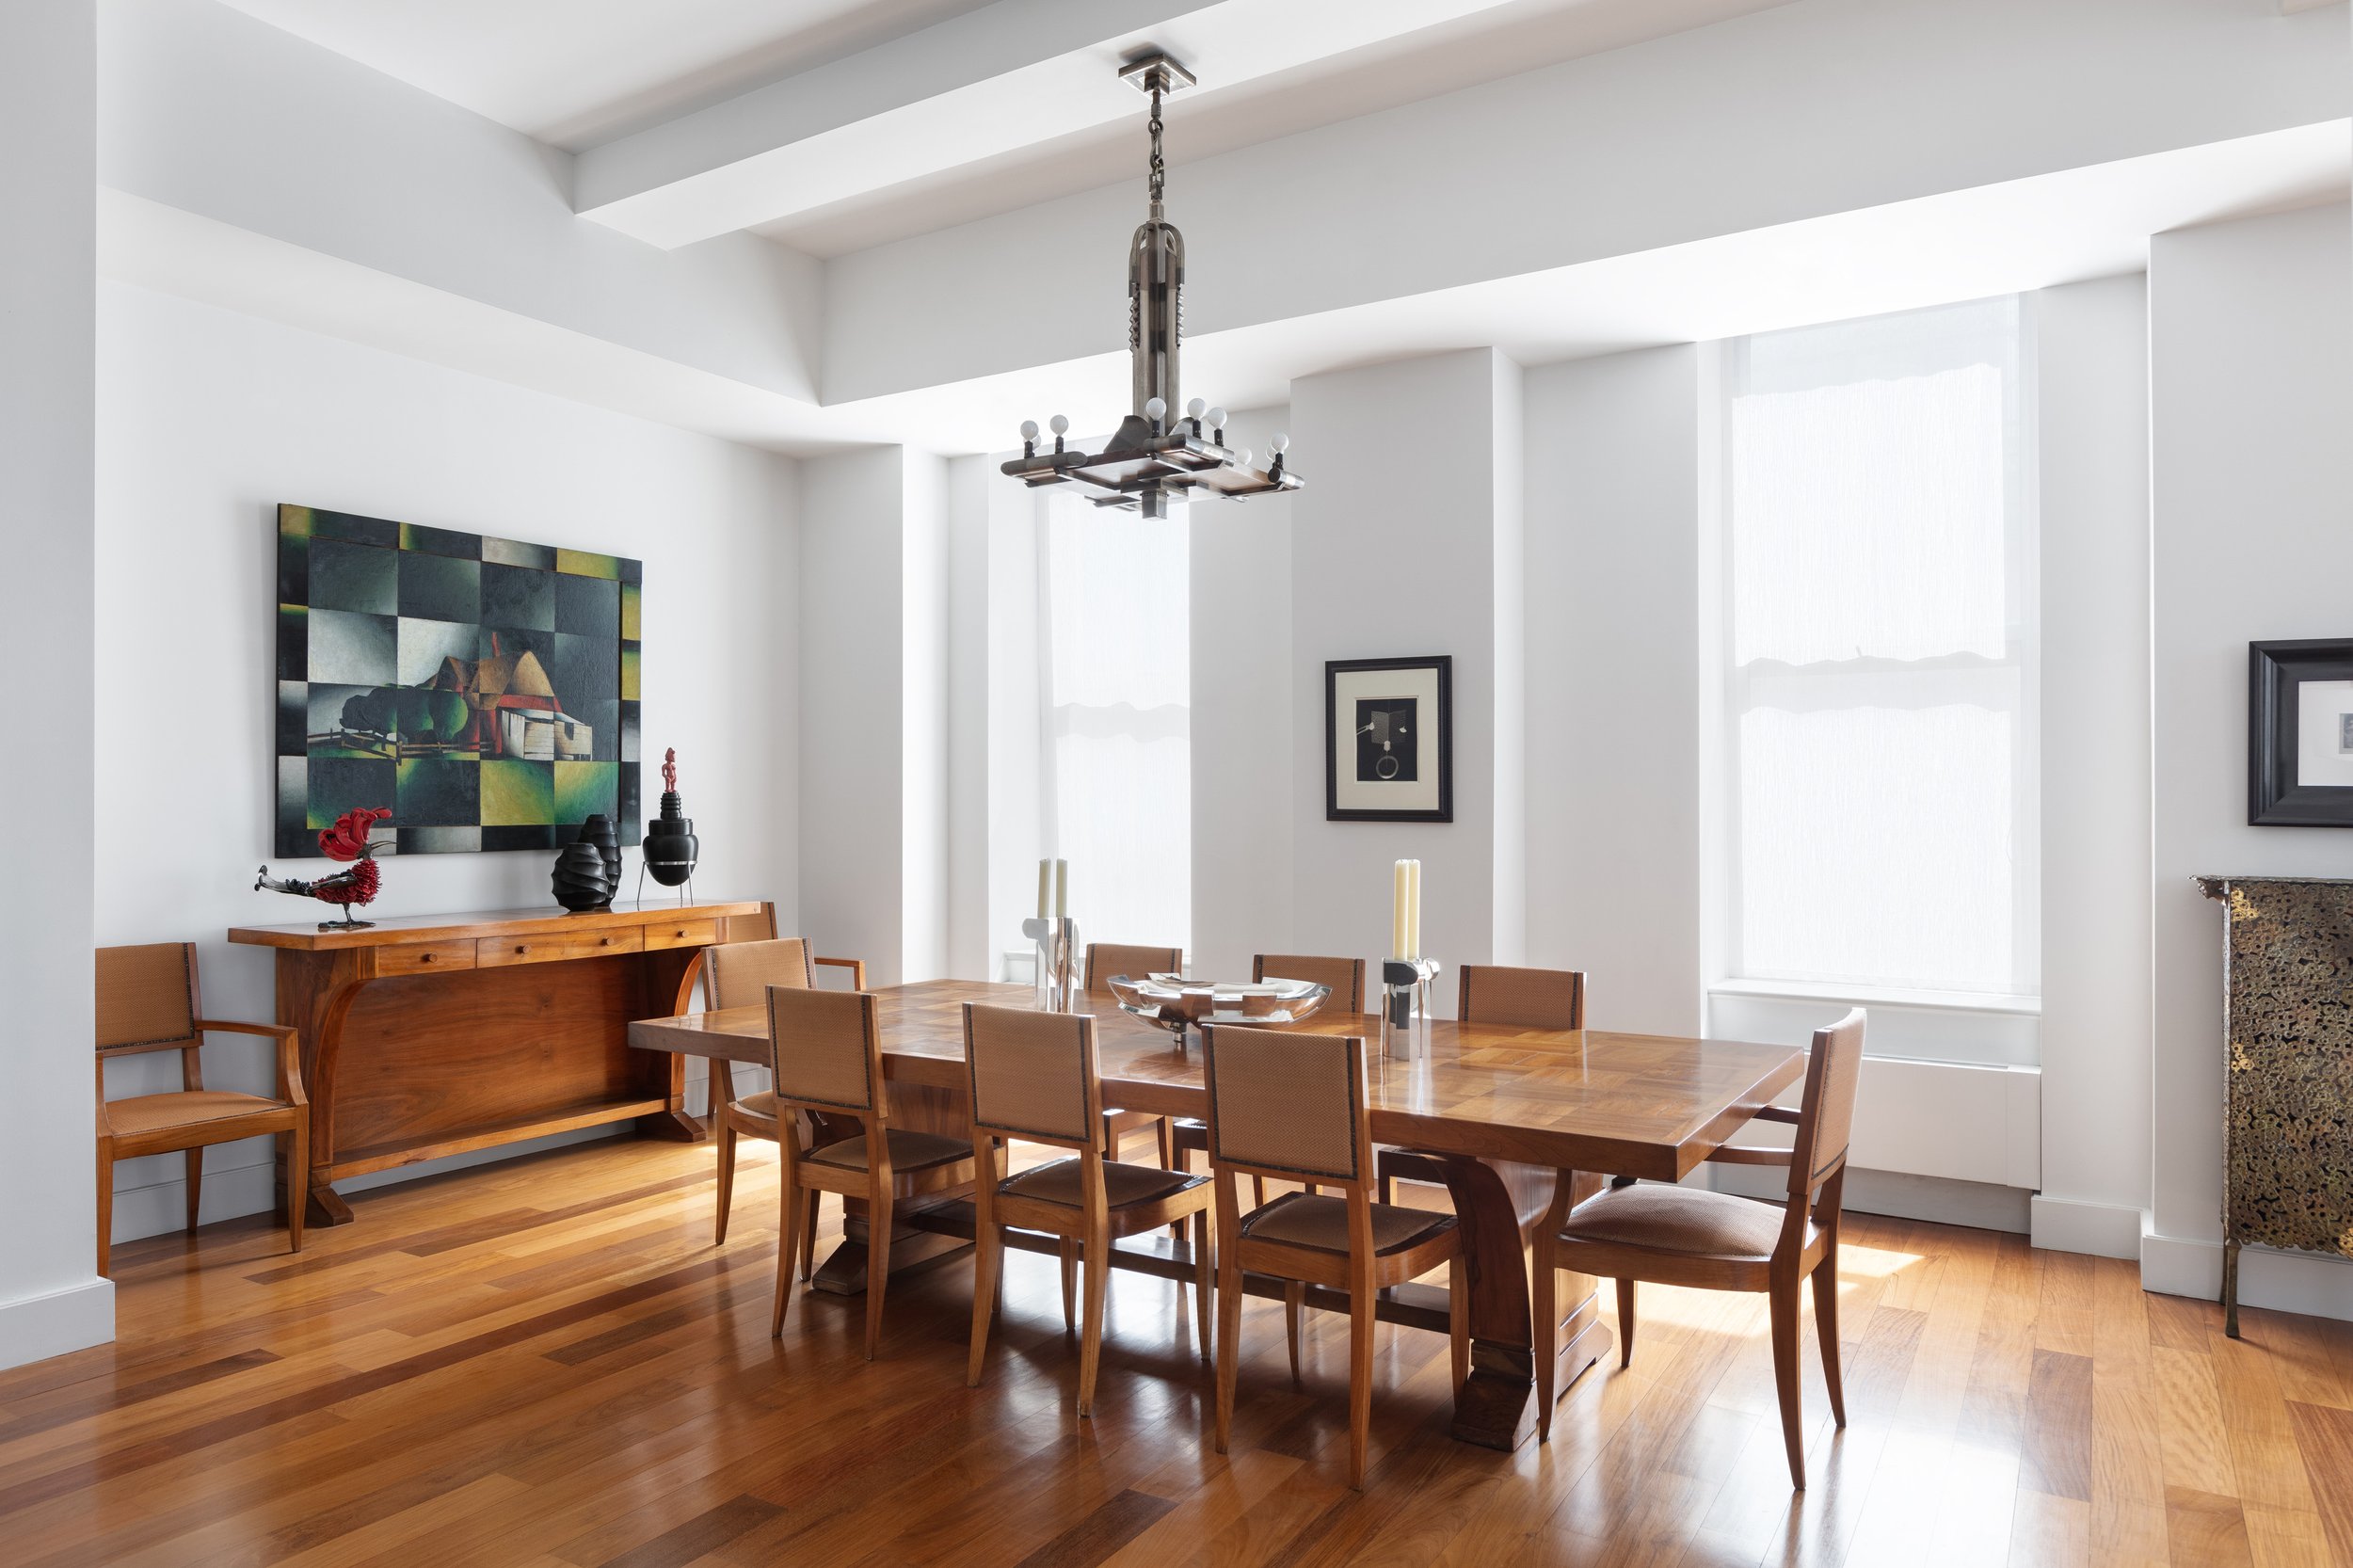  The Design Edit  Barry Friedman   Take a peek into Barry Friedman’s dining room. As a gallery owner, art and antique collector, &amp; dealer you can see his love for the arts even in the dinning room. Table, chairs and sideboard by Leon Jallot; hang